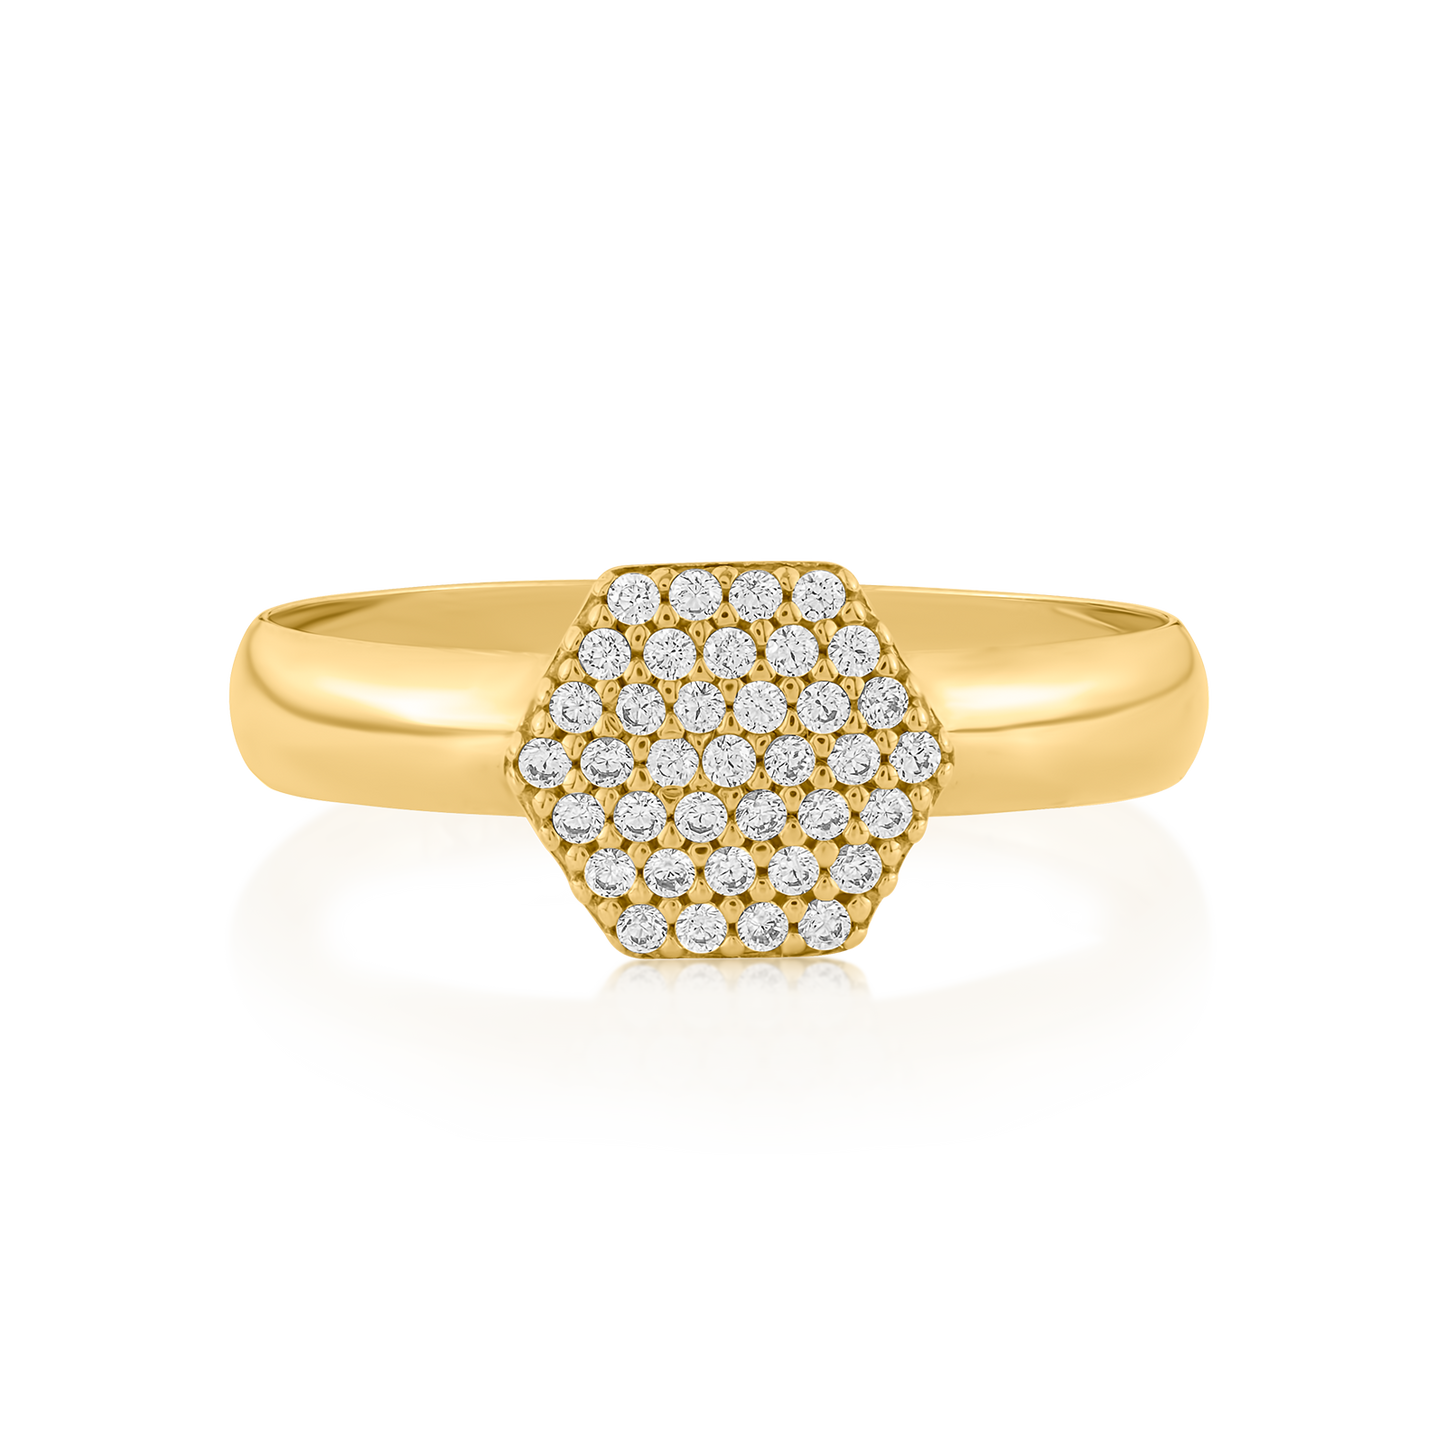 18K Yellow Gold Hexagonal Pave Ring with CZs